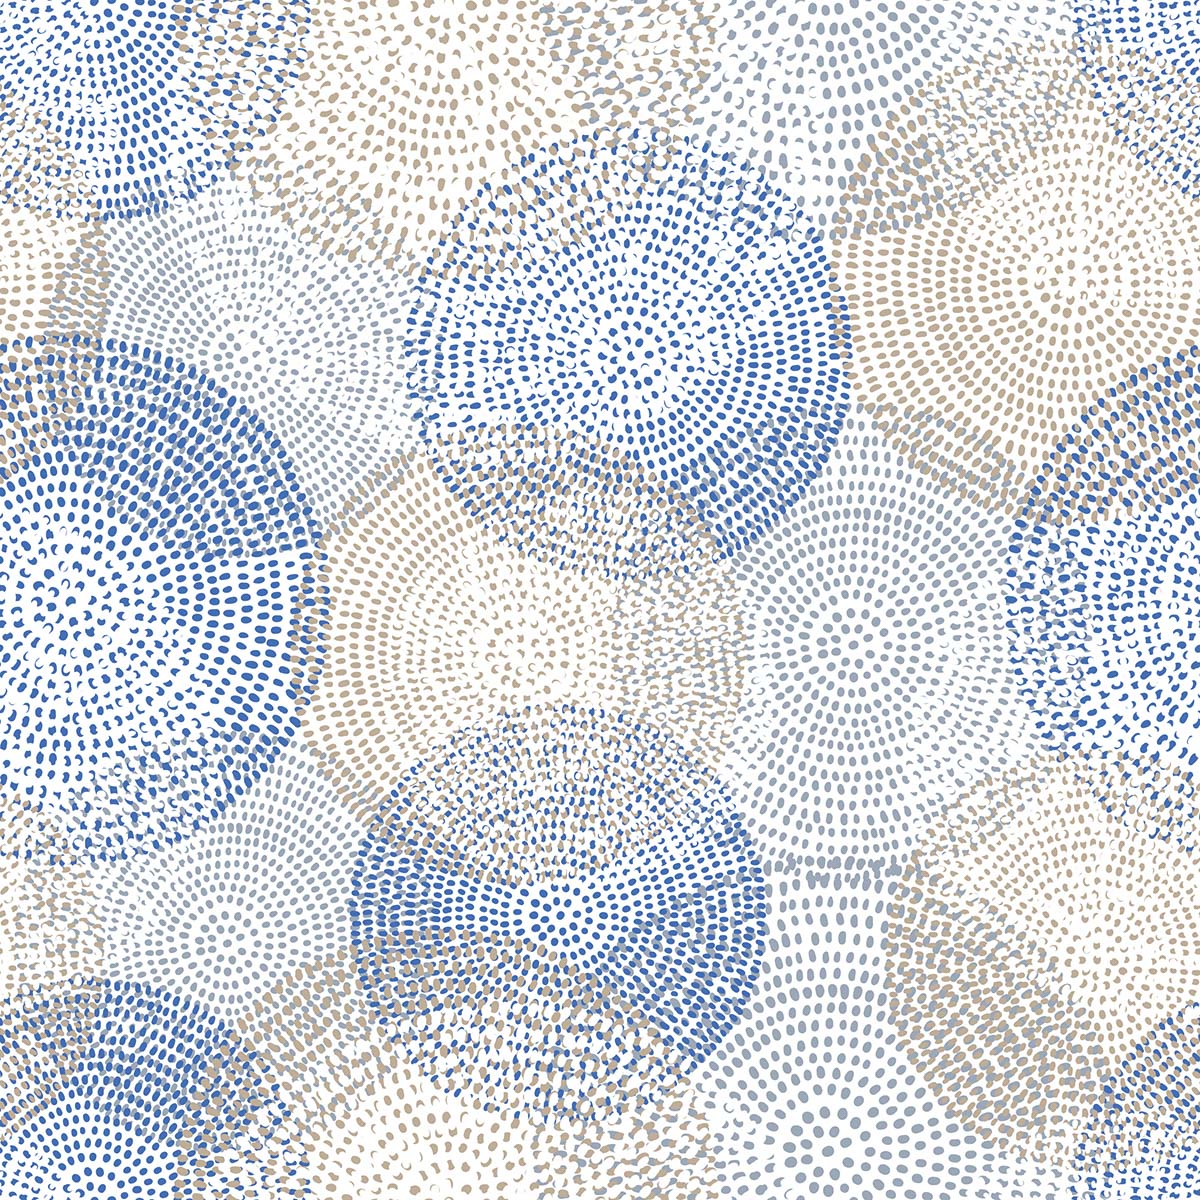 A pattern of blue and white circles